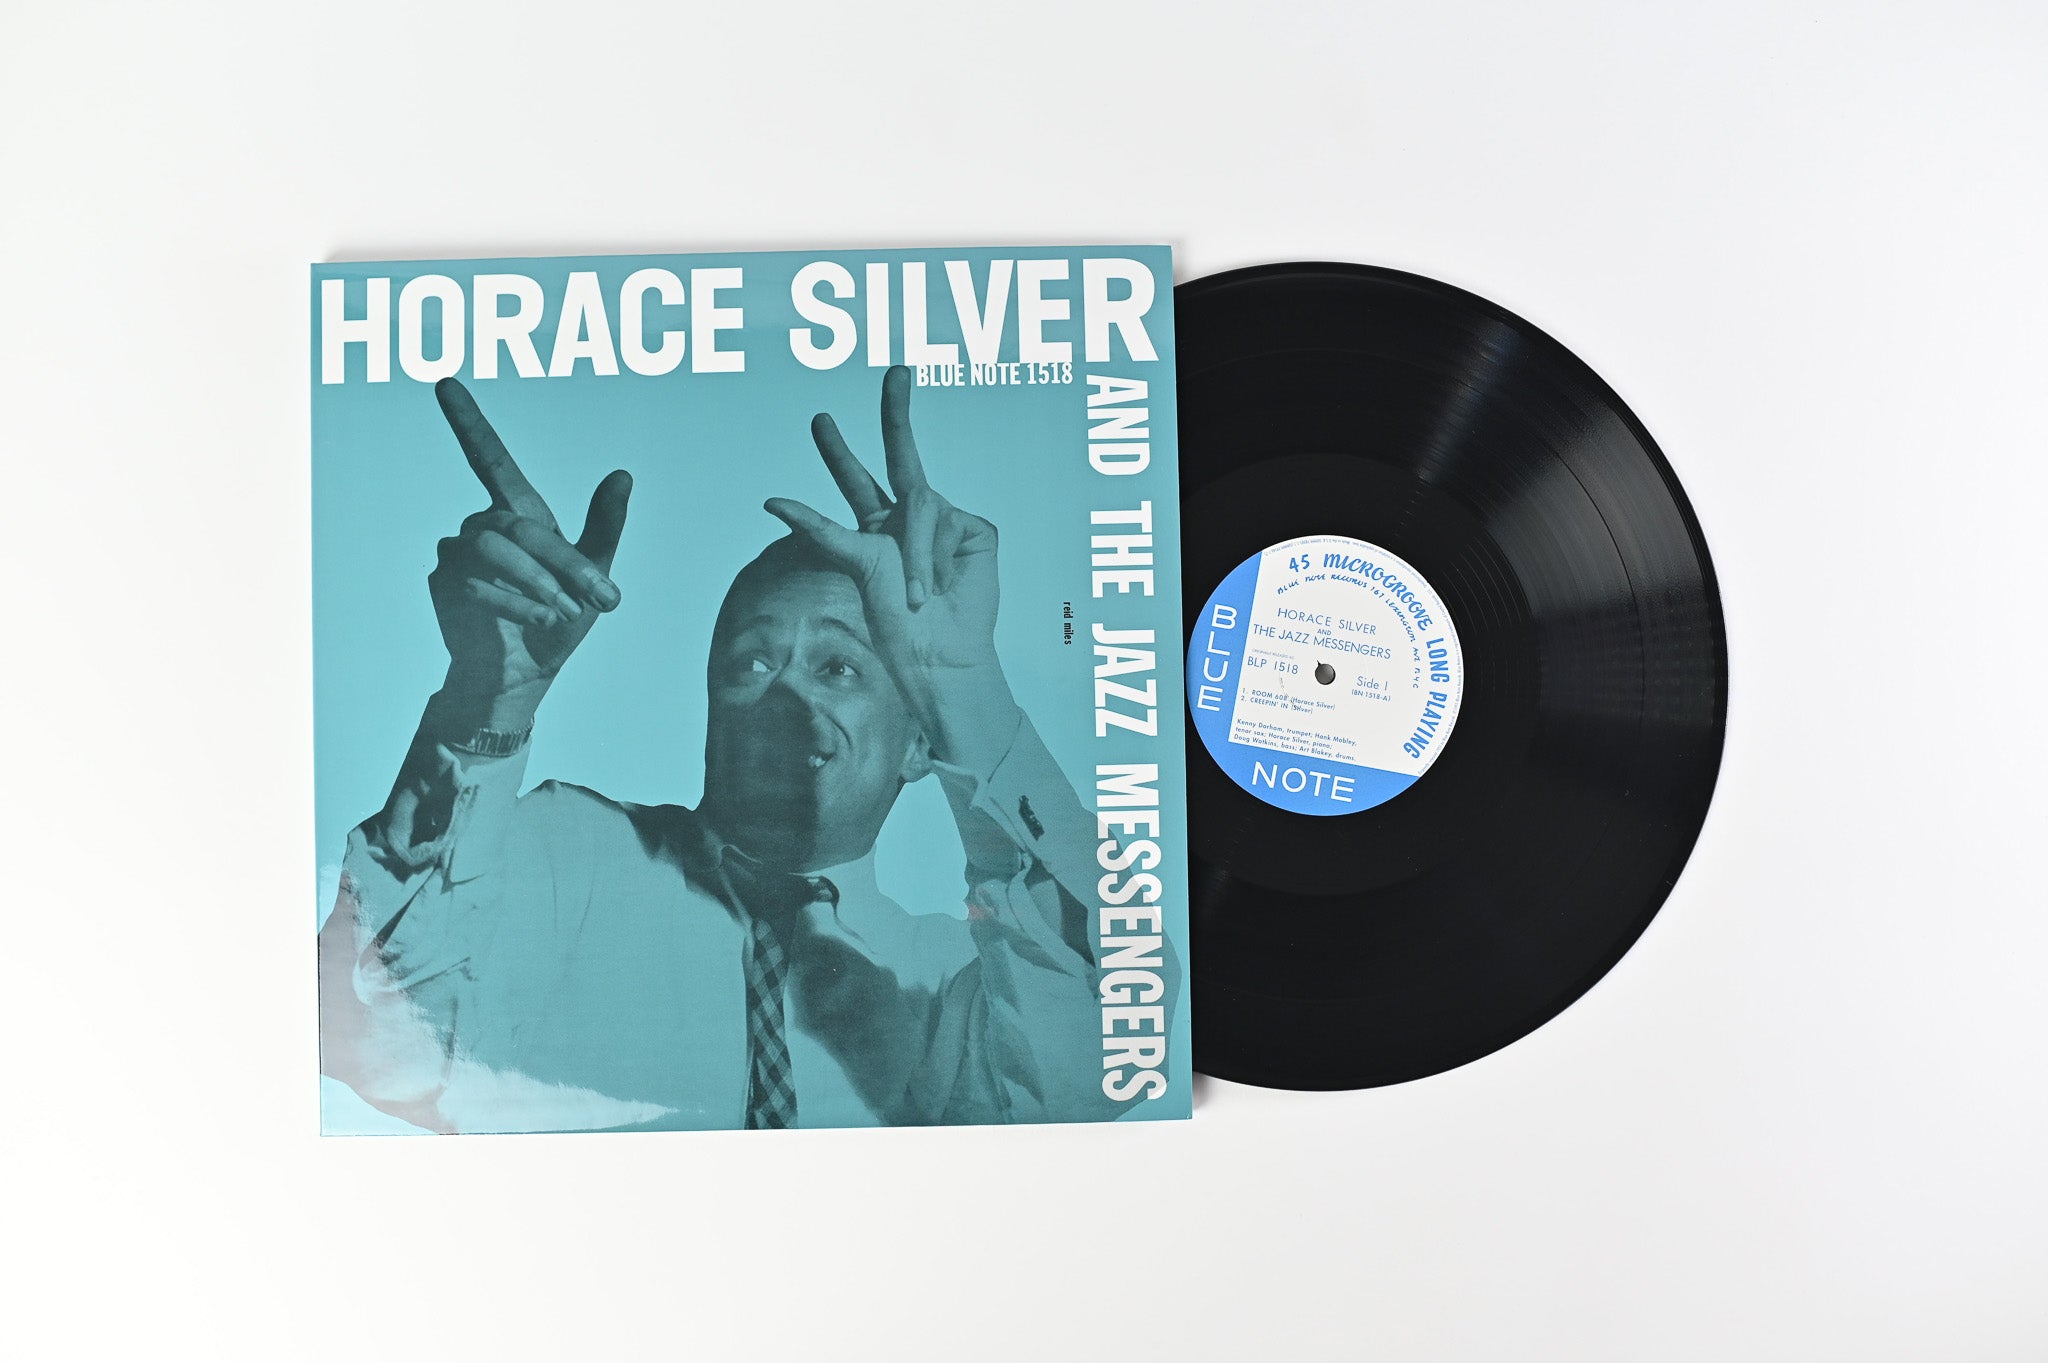 Horace Silver - Horace Silver And The Jazz Messengers on Blue Note Music Matters Ltd Reissue 45 RPM